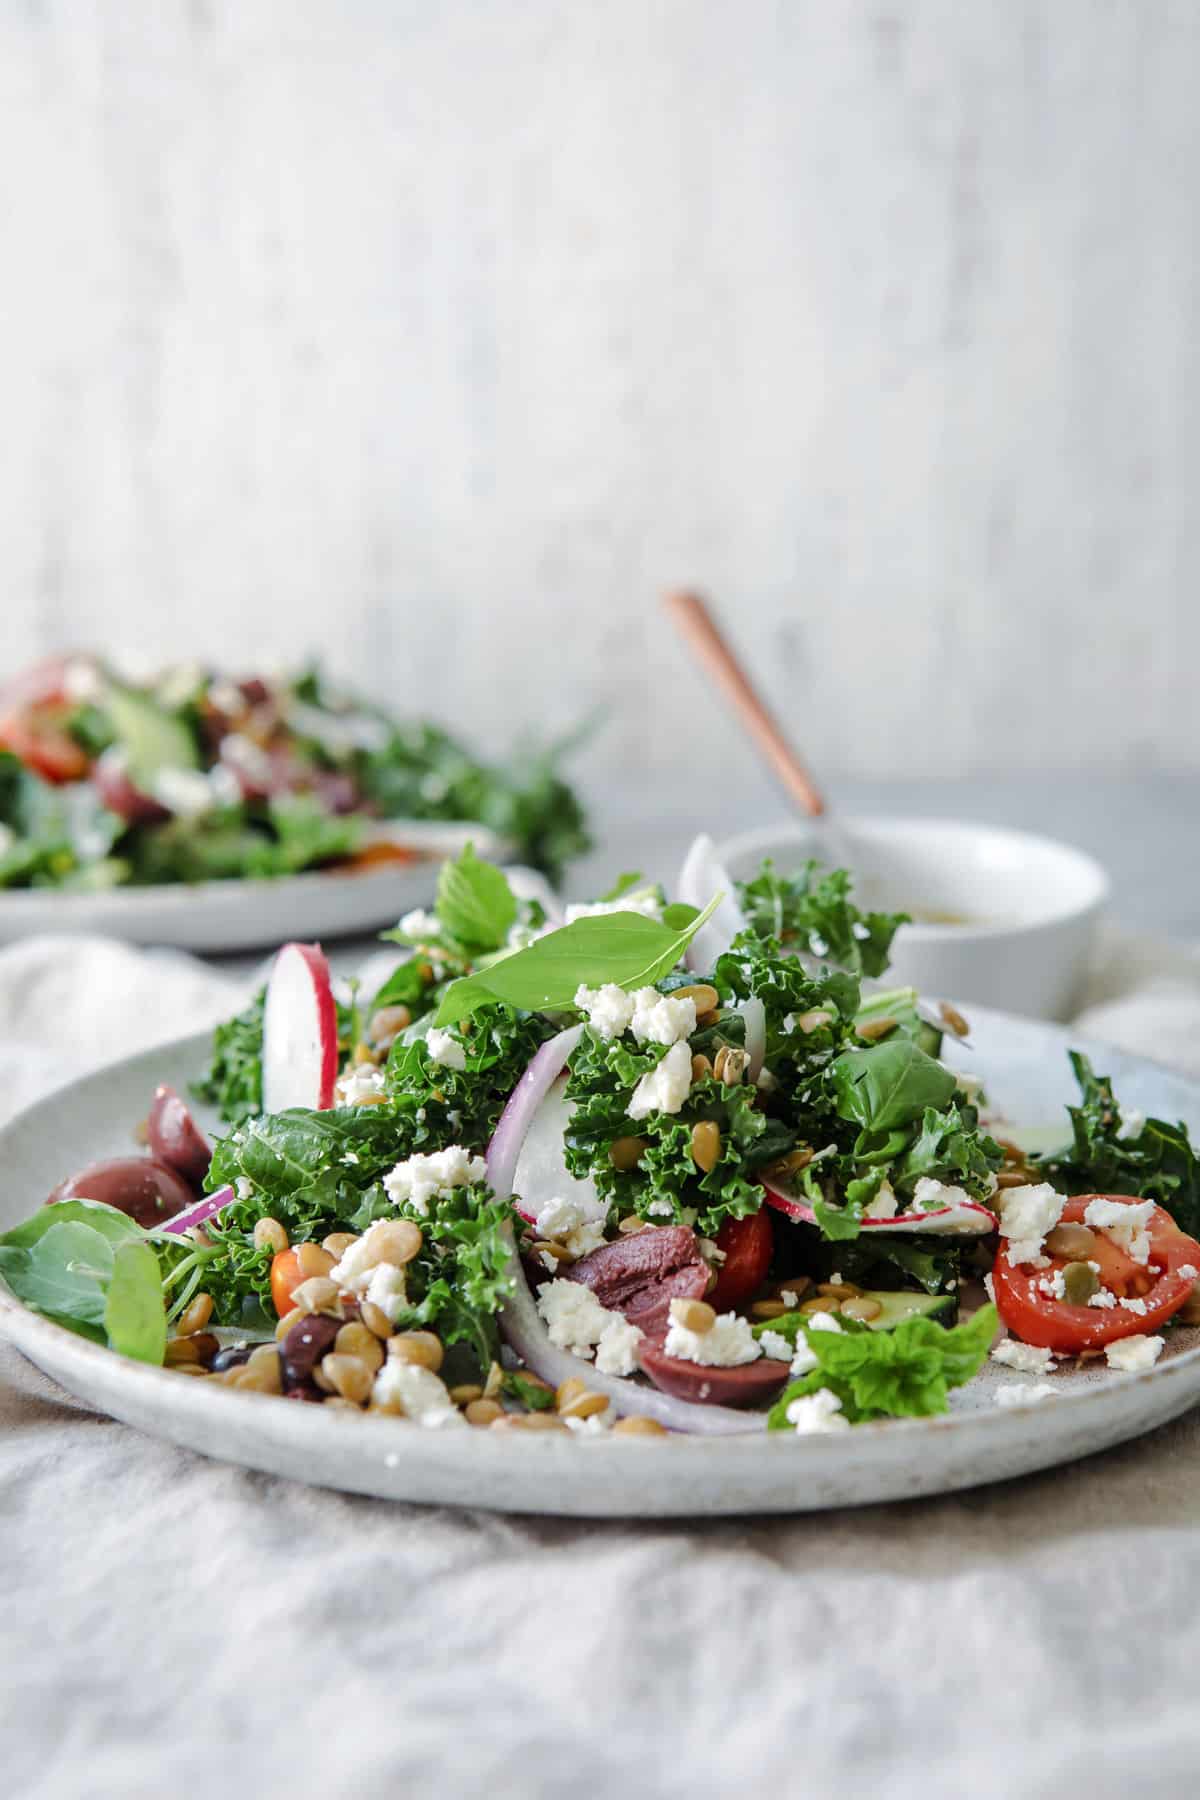 A plate with a serving of Mediterranean Lentil Salad.